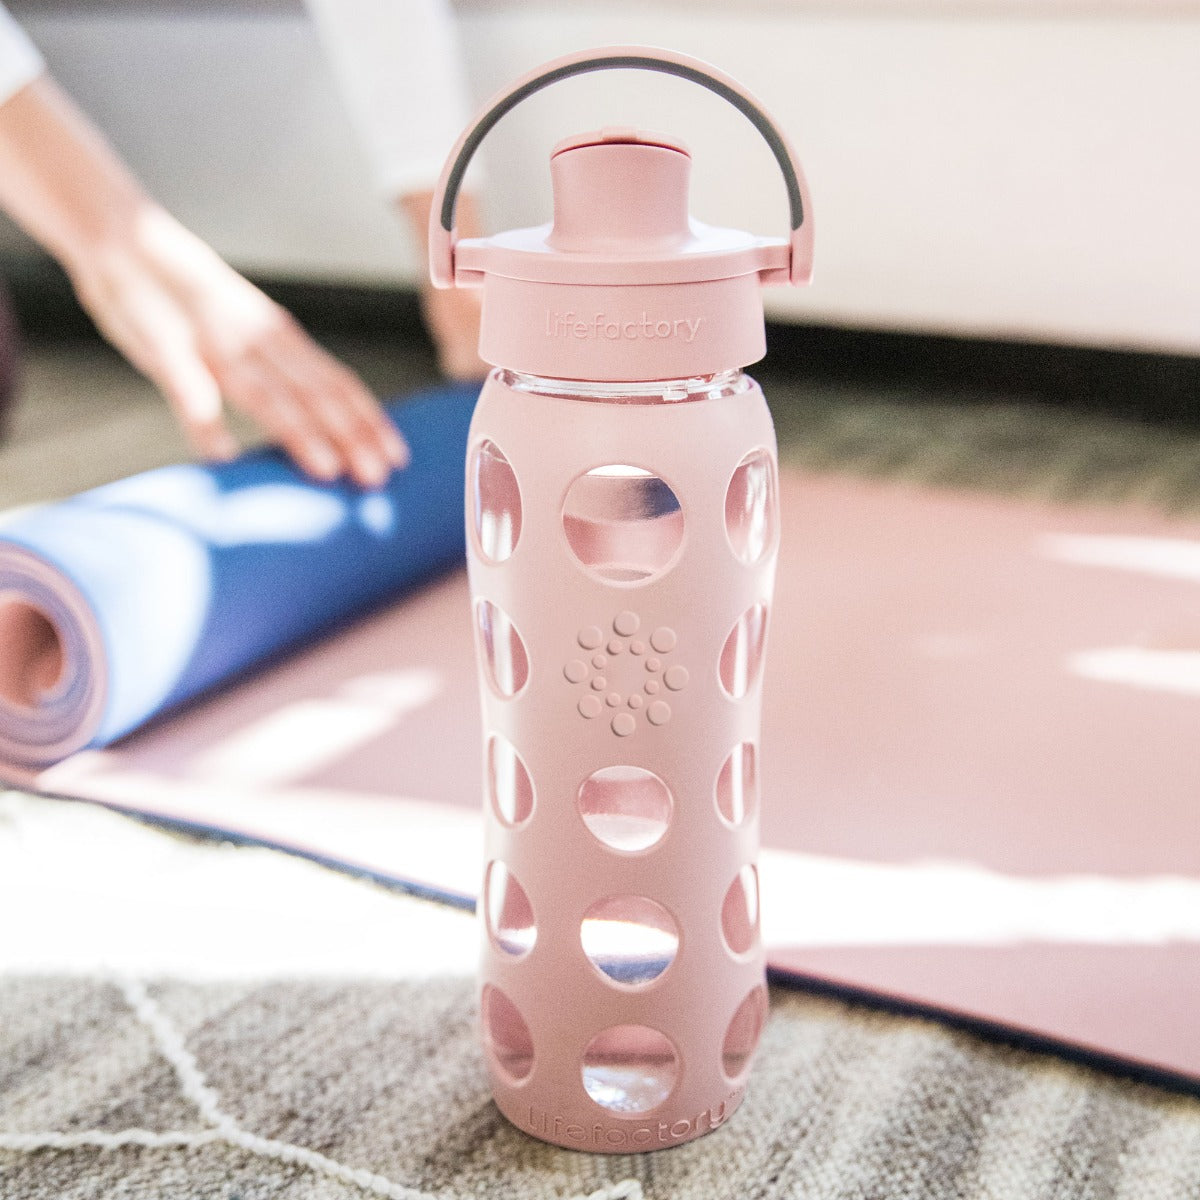 Lifefactory Insulated Glass Bottle - Mug To Go with Keep Warm